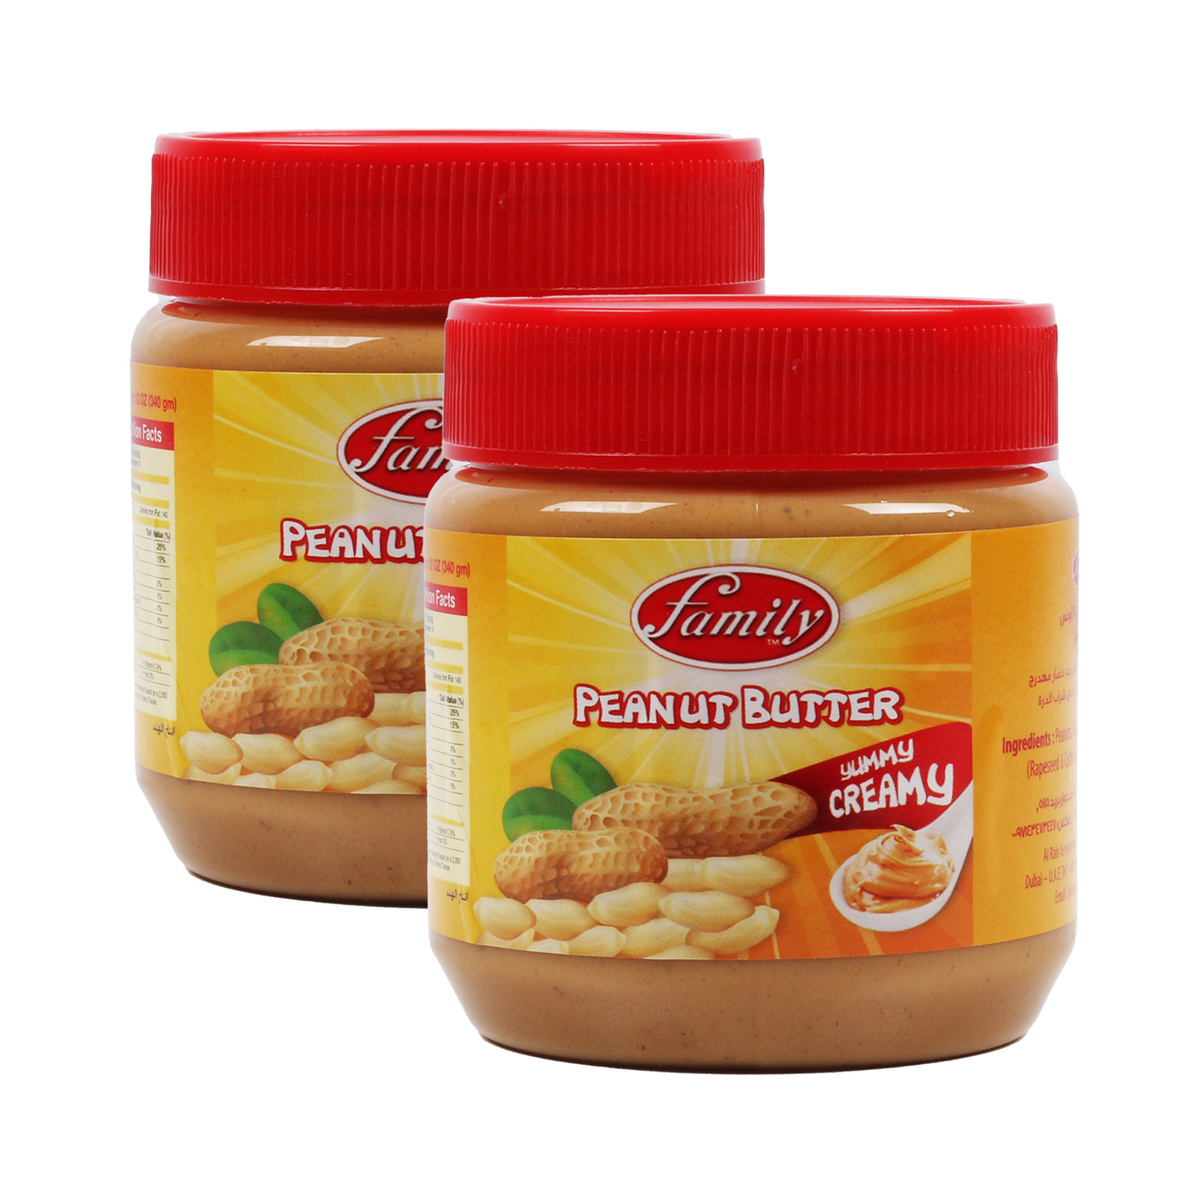 Family Creamy Peanut Butter Value Pack 2 x 340g